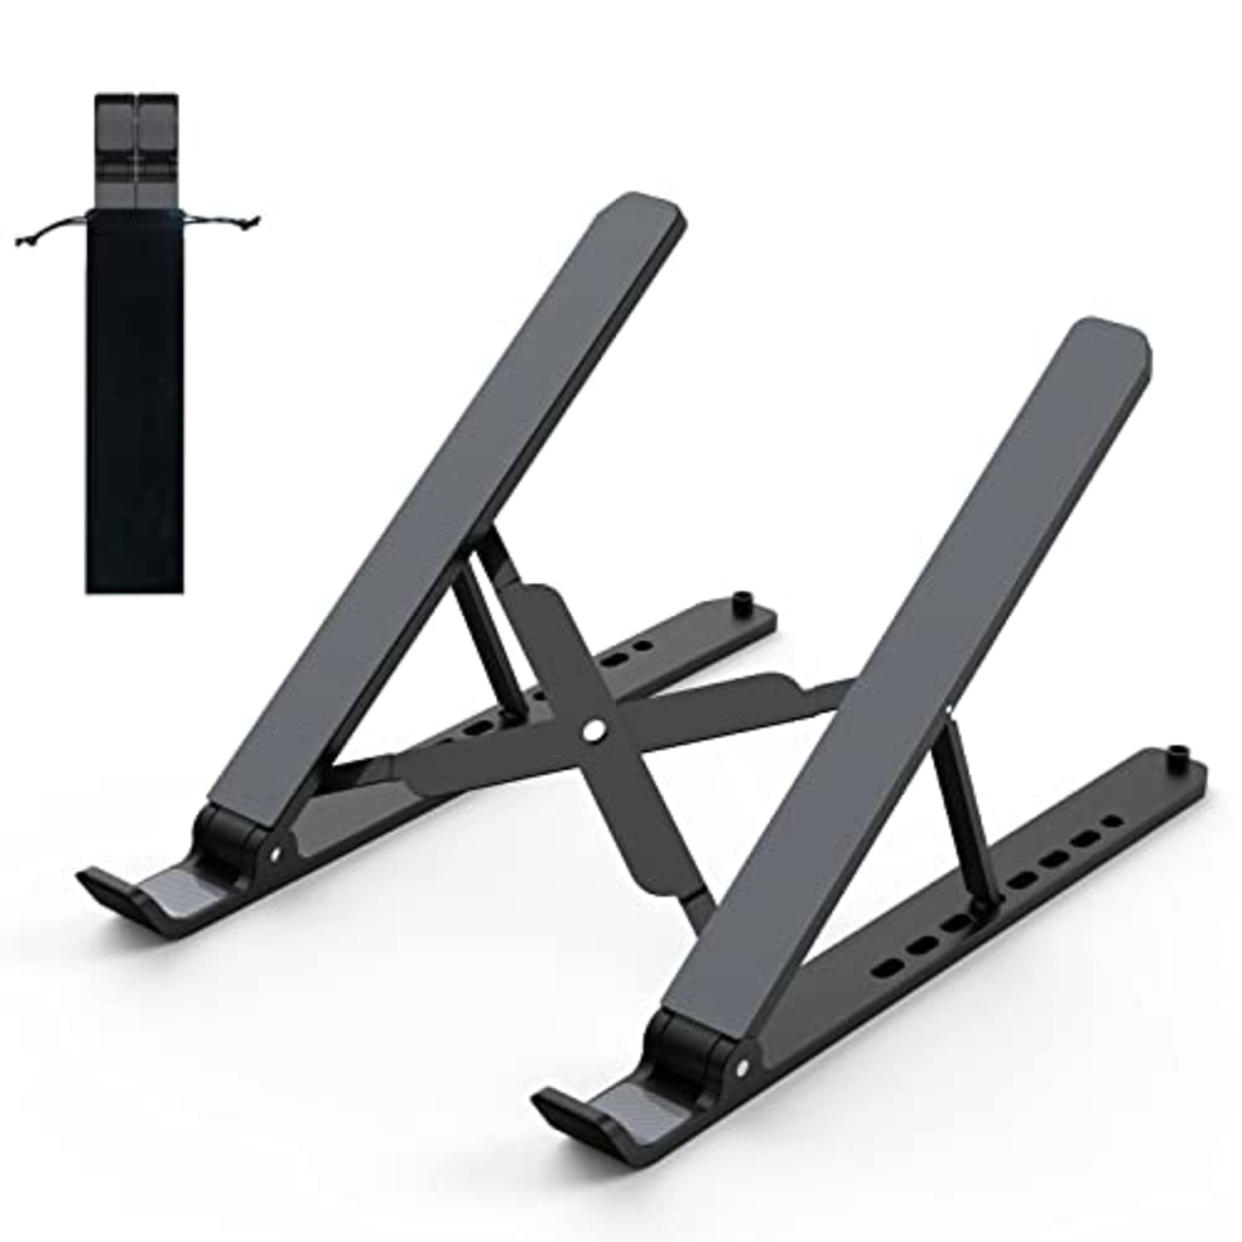 Tonmom Laptop Stand for Desk, Adjustable Riser ABS+Silicone Foldable and Portable Holder, Ventilated Cooling Notebook Stand for 10-15.6” Laptops,Tablet-Black (AMAZON)